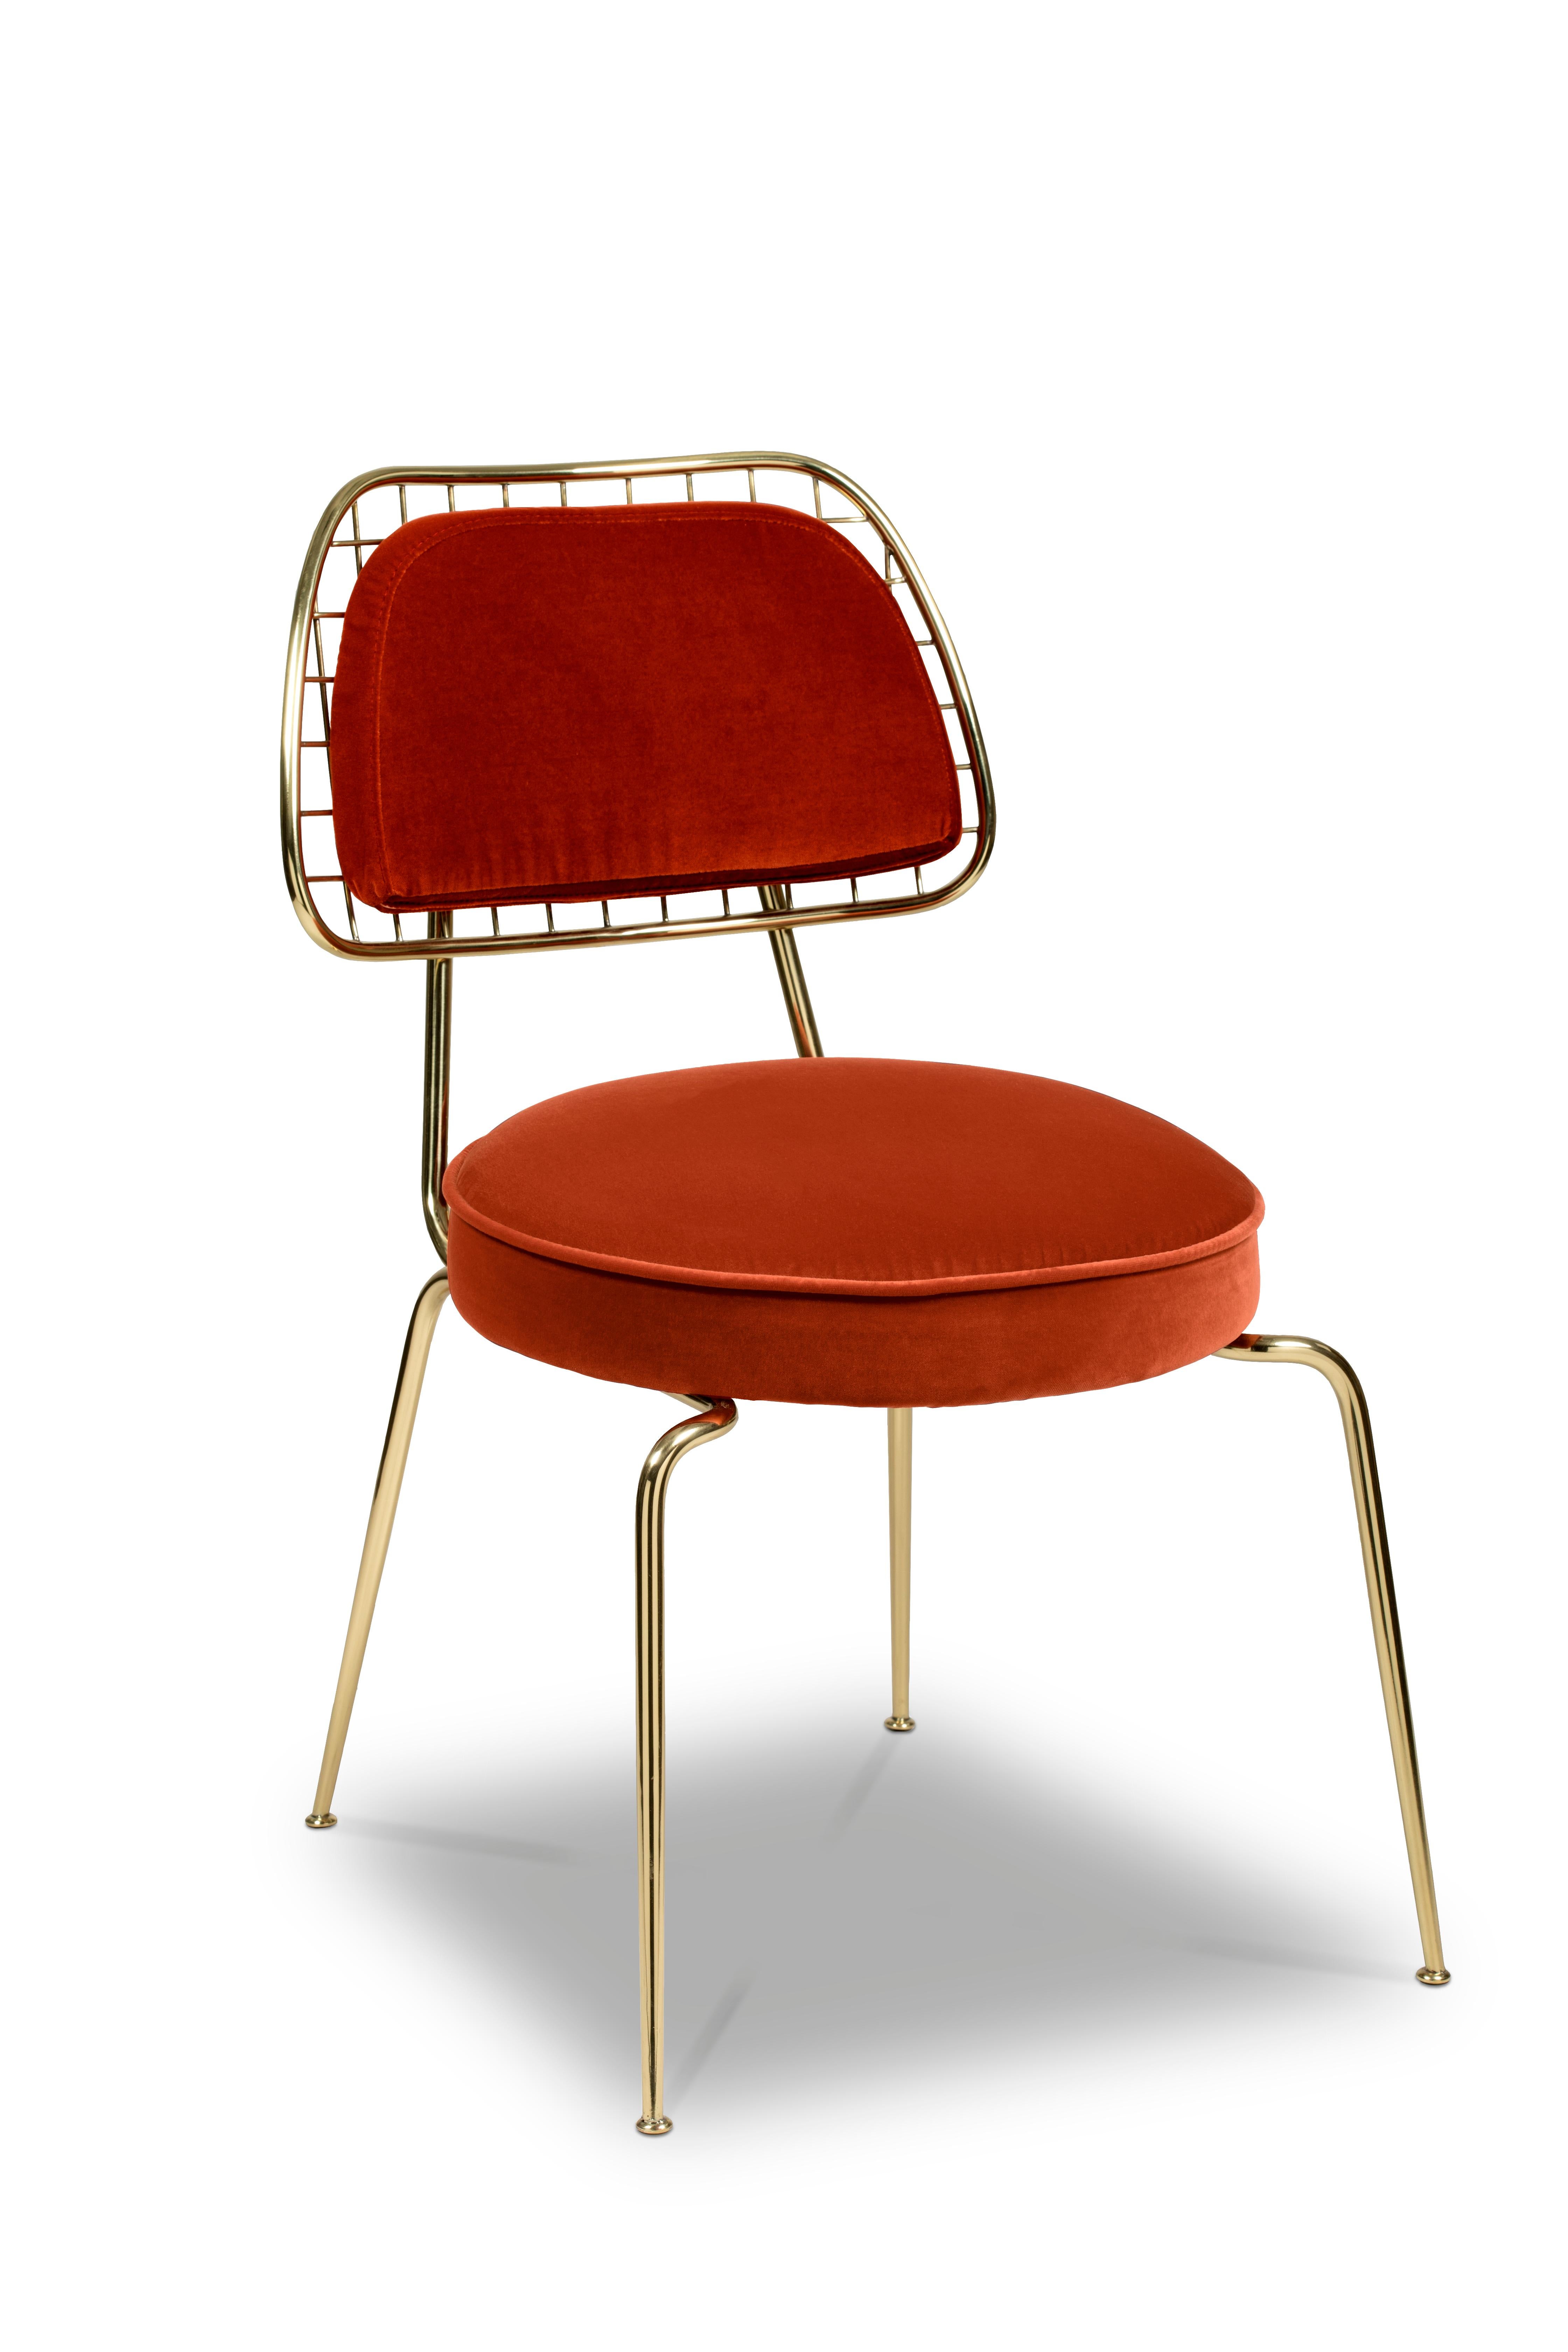 Marie is a rather an occasional dining chair that incorporates all of the mid-century elements into a contemporary vision. Its construction features slim legs made of polished brass, a round pad upholstered with a seductive velvet and a round back.